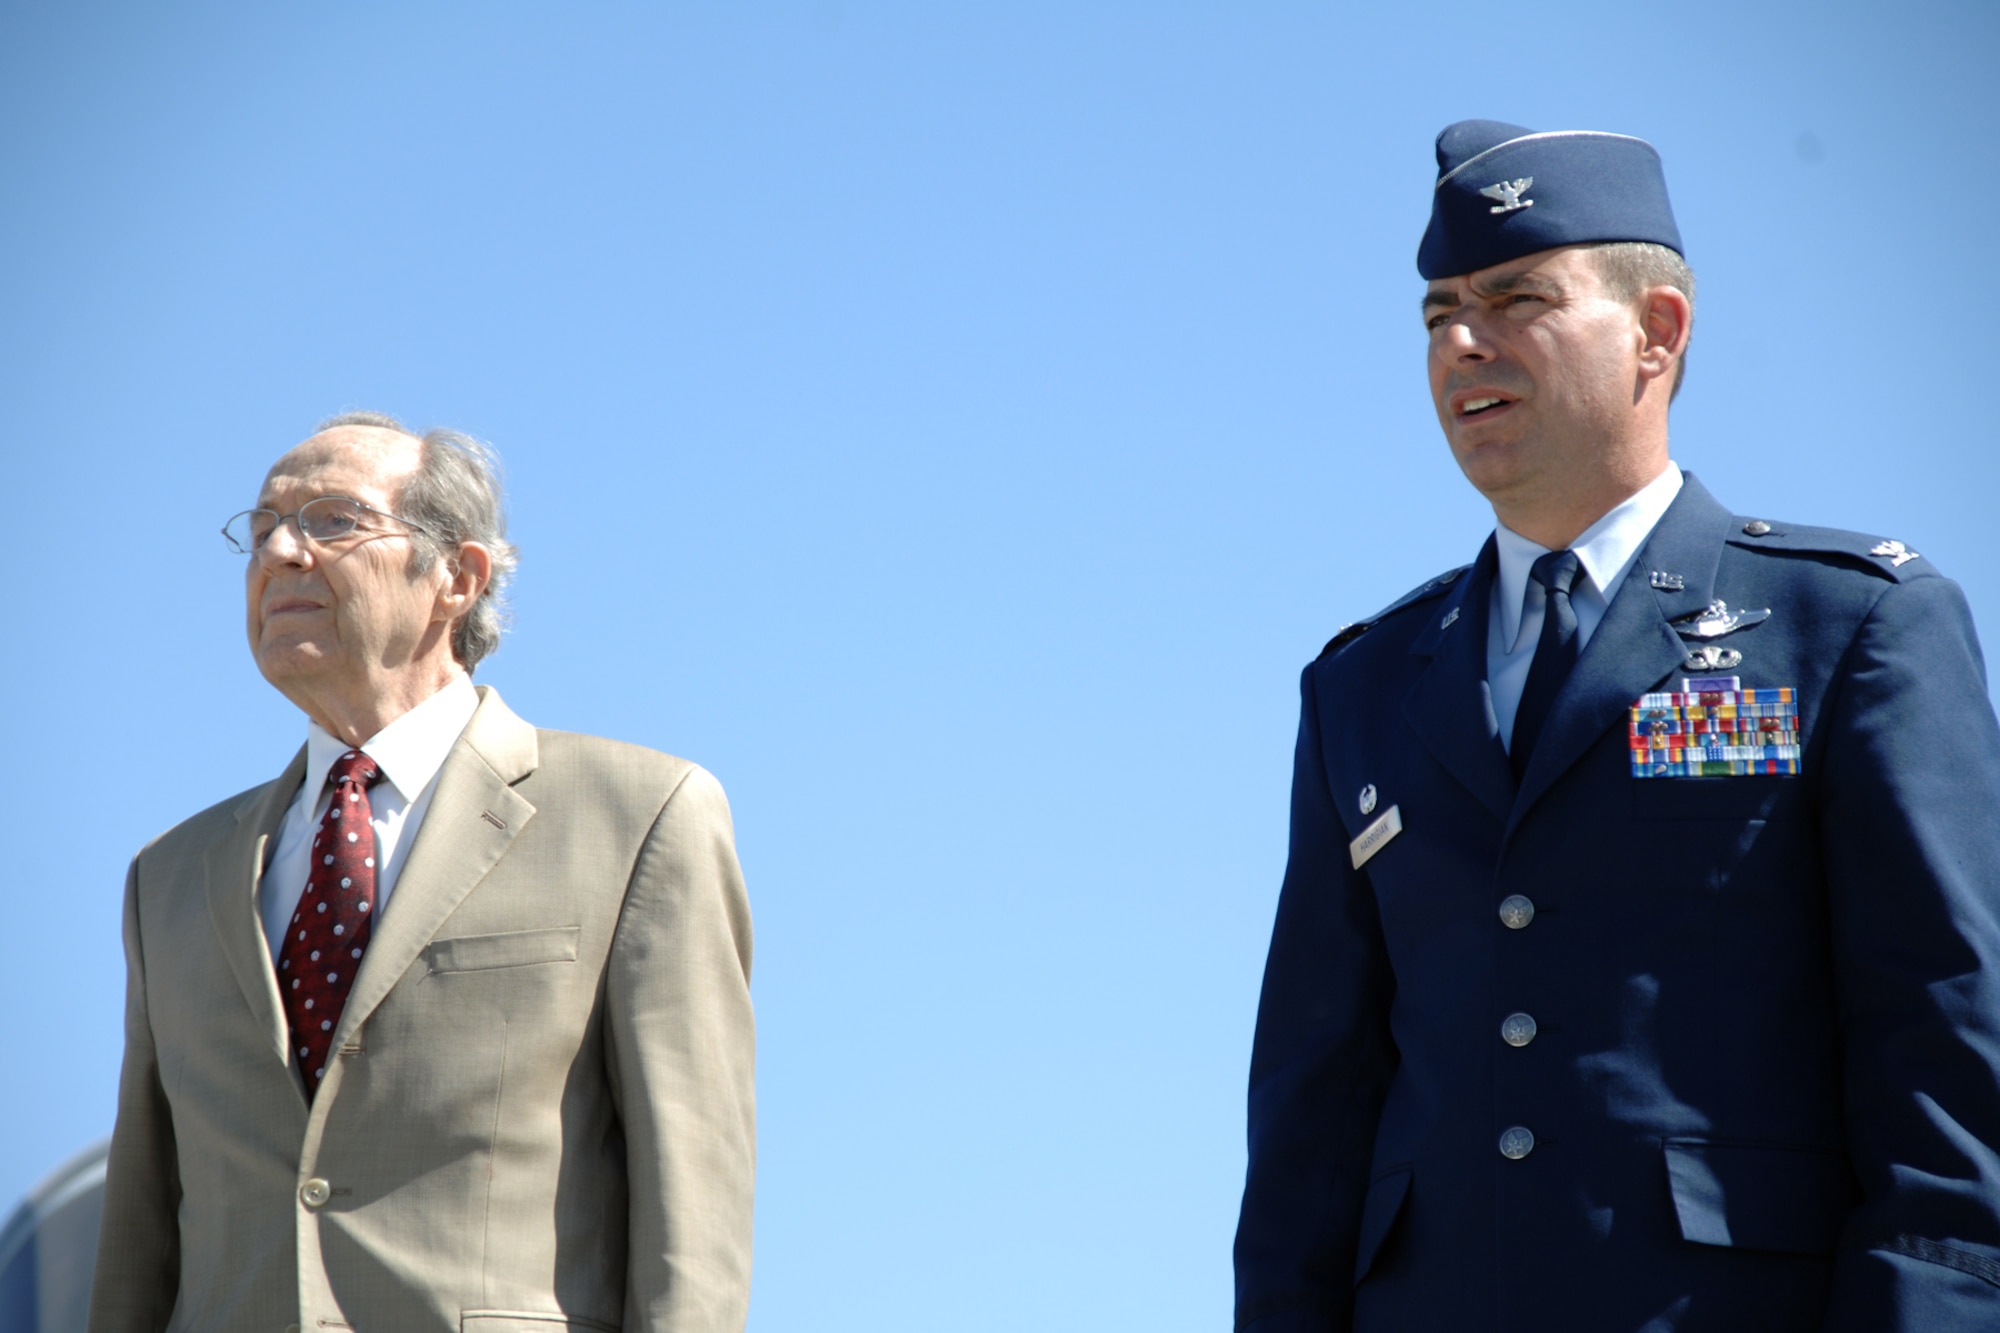 HOLLOMAN AIR FORCE BASE, N.M.--Dr. William Perry, former Secretary of Defense, and 49th Fighter Wing Commander Col. Jeff Harrigian stand during the singing of the Air Force Song at the conclusion of the Sunset Stealth retirement ceremony April 21, 2008, here at Heritage Park. The ceremony retired the final four F-117A Nighthawks. During the ceremony, the four Nighthawks flew in formation on their way to Tonopah, Nev., which will serve as their final resting spot. (U.S. Air Force photo/Airman 1st Class Jamal D. Sutter)